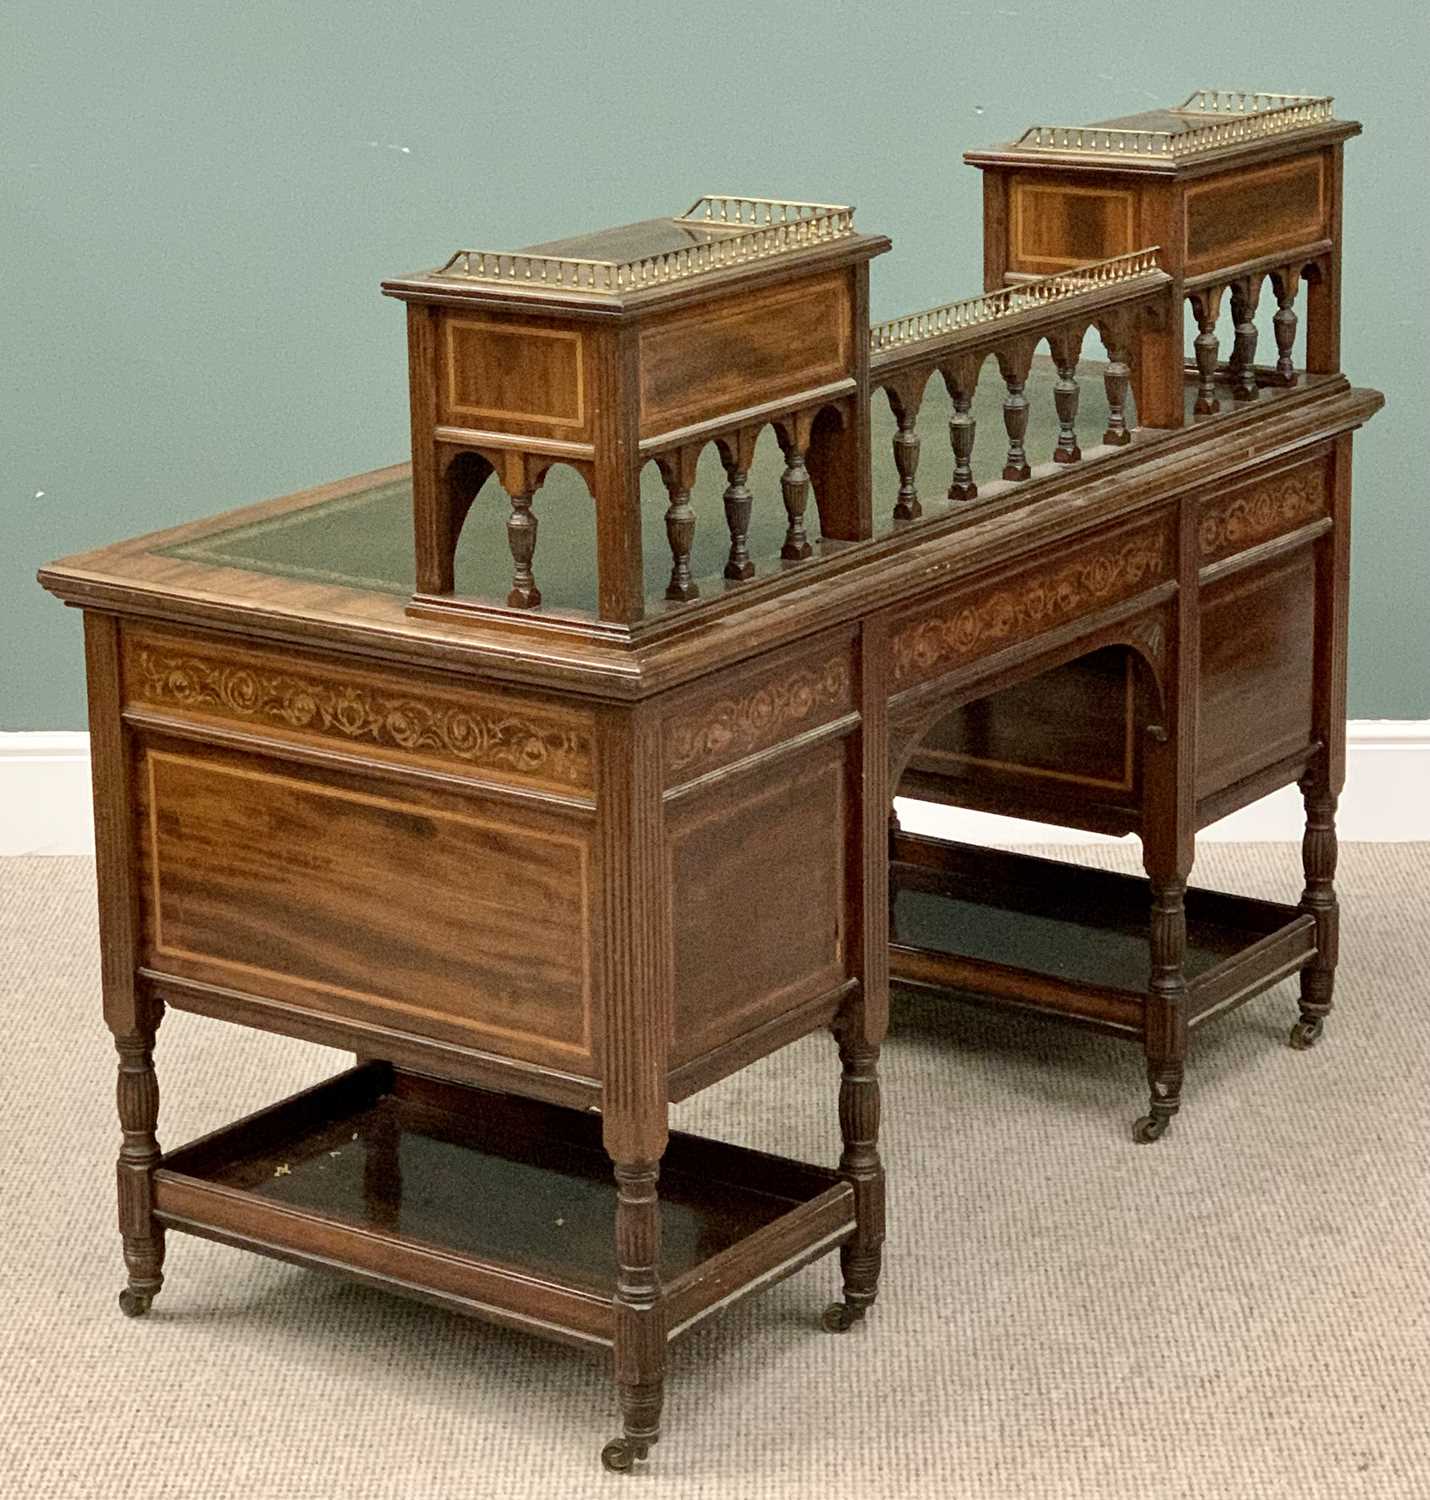 MAHOGANY DESK - fine twin pedestal example with railback and elevated drawers, inlaid detail - Image 5 of 5